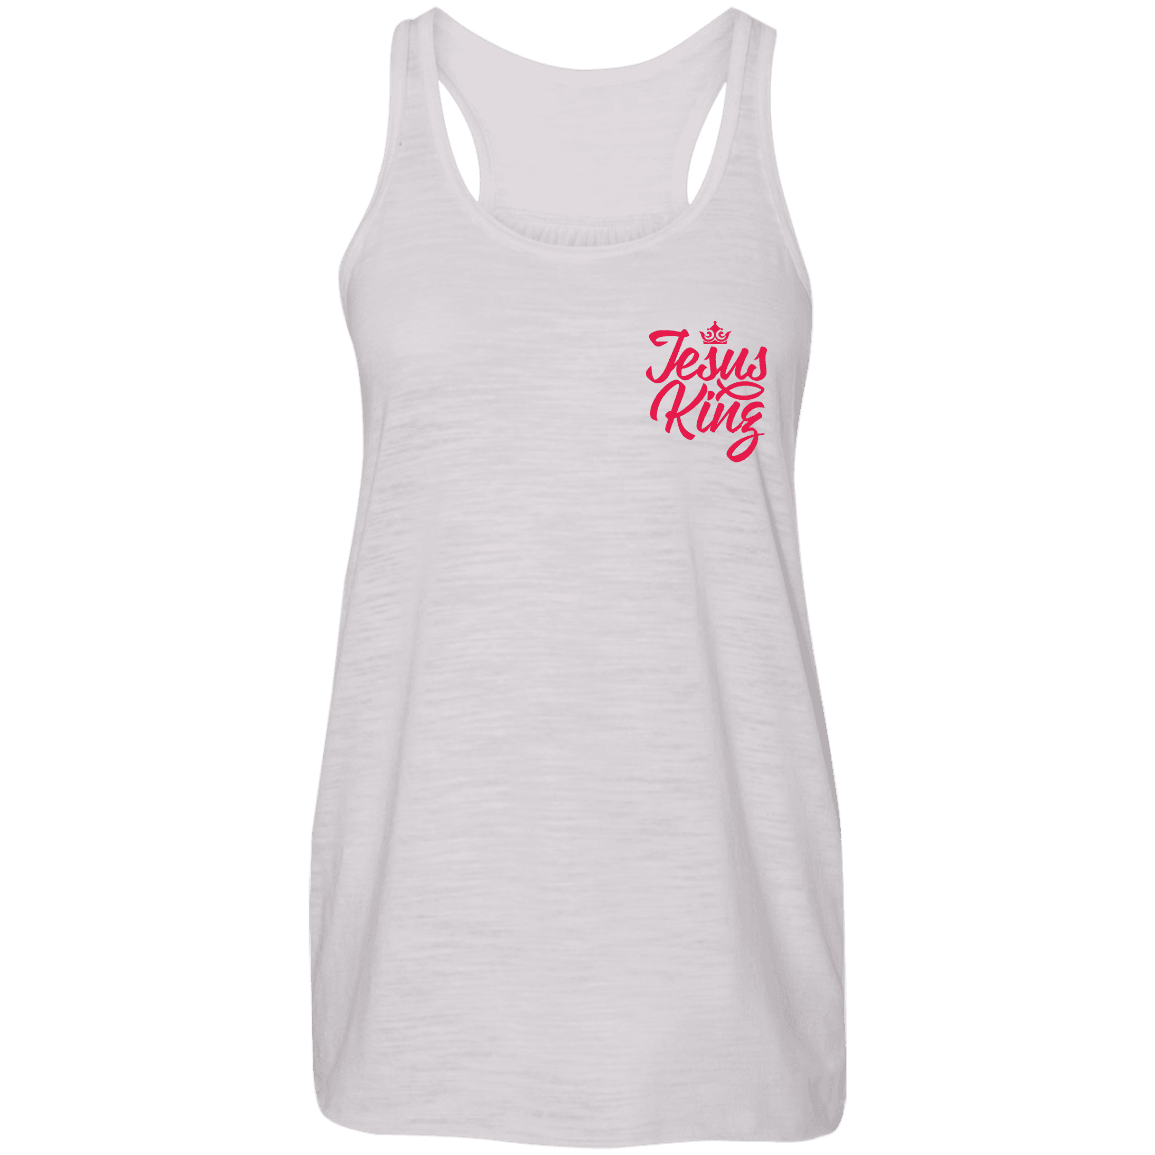 Designs by MyUtopia Shout Out:Jesus King Ladies Flowy Racer-back Tank Top,Vintage White / X-Small,Tank Tops